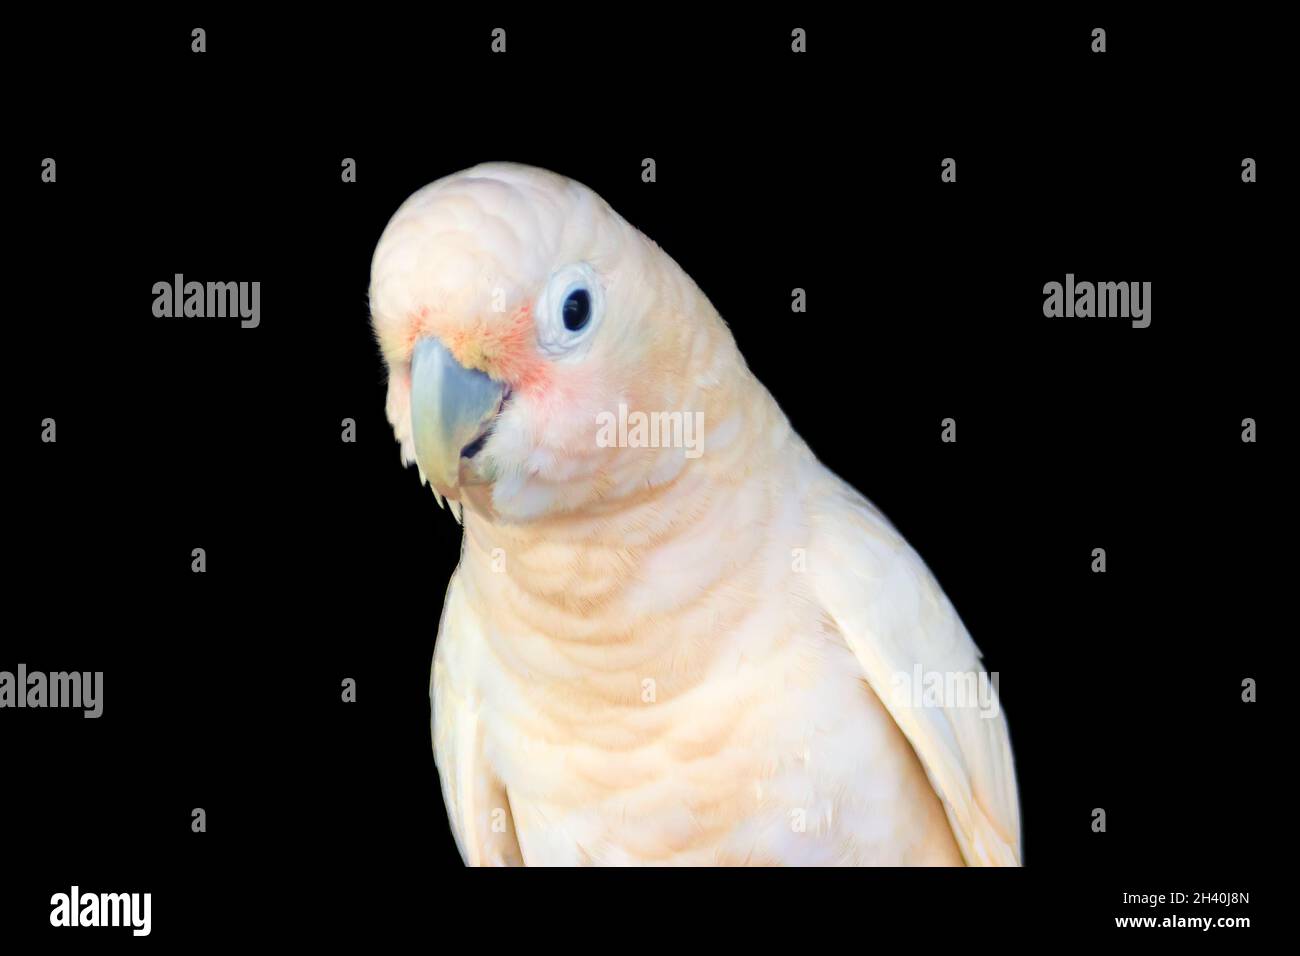 Greater sulphur-crested cockatoo Stock Photo